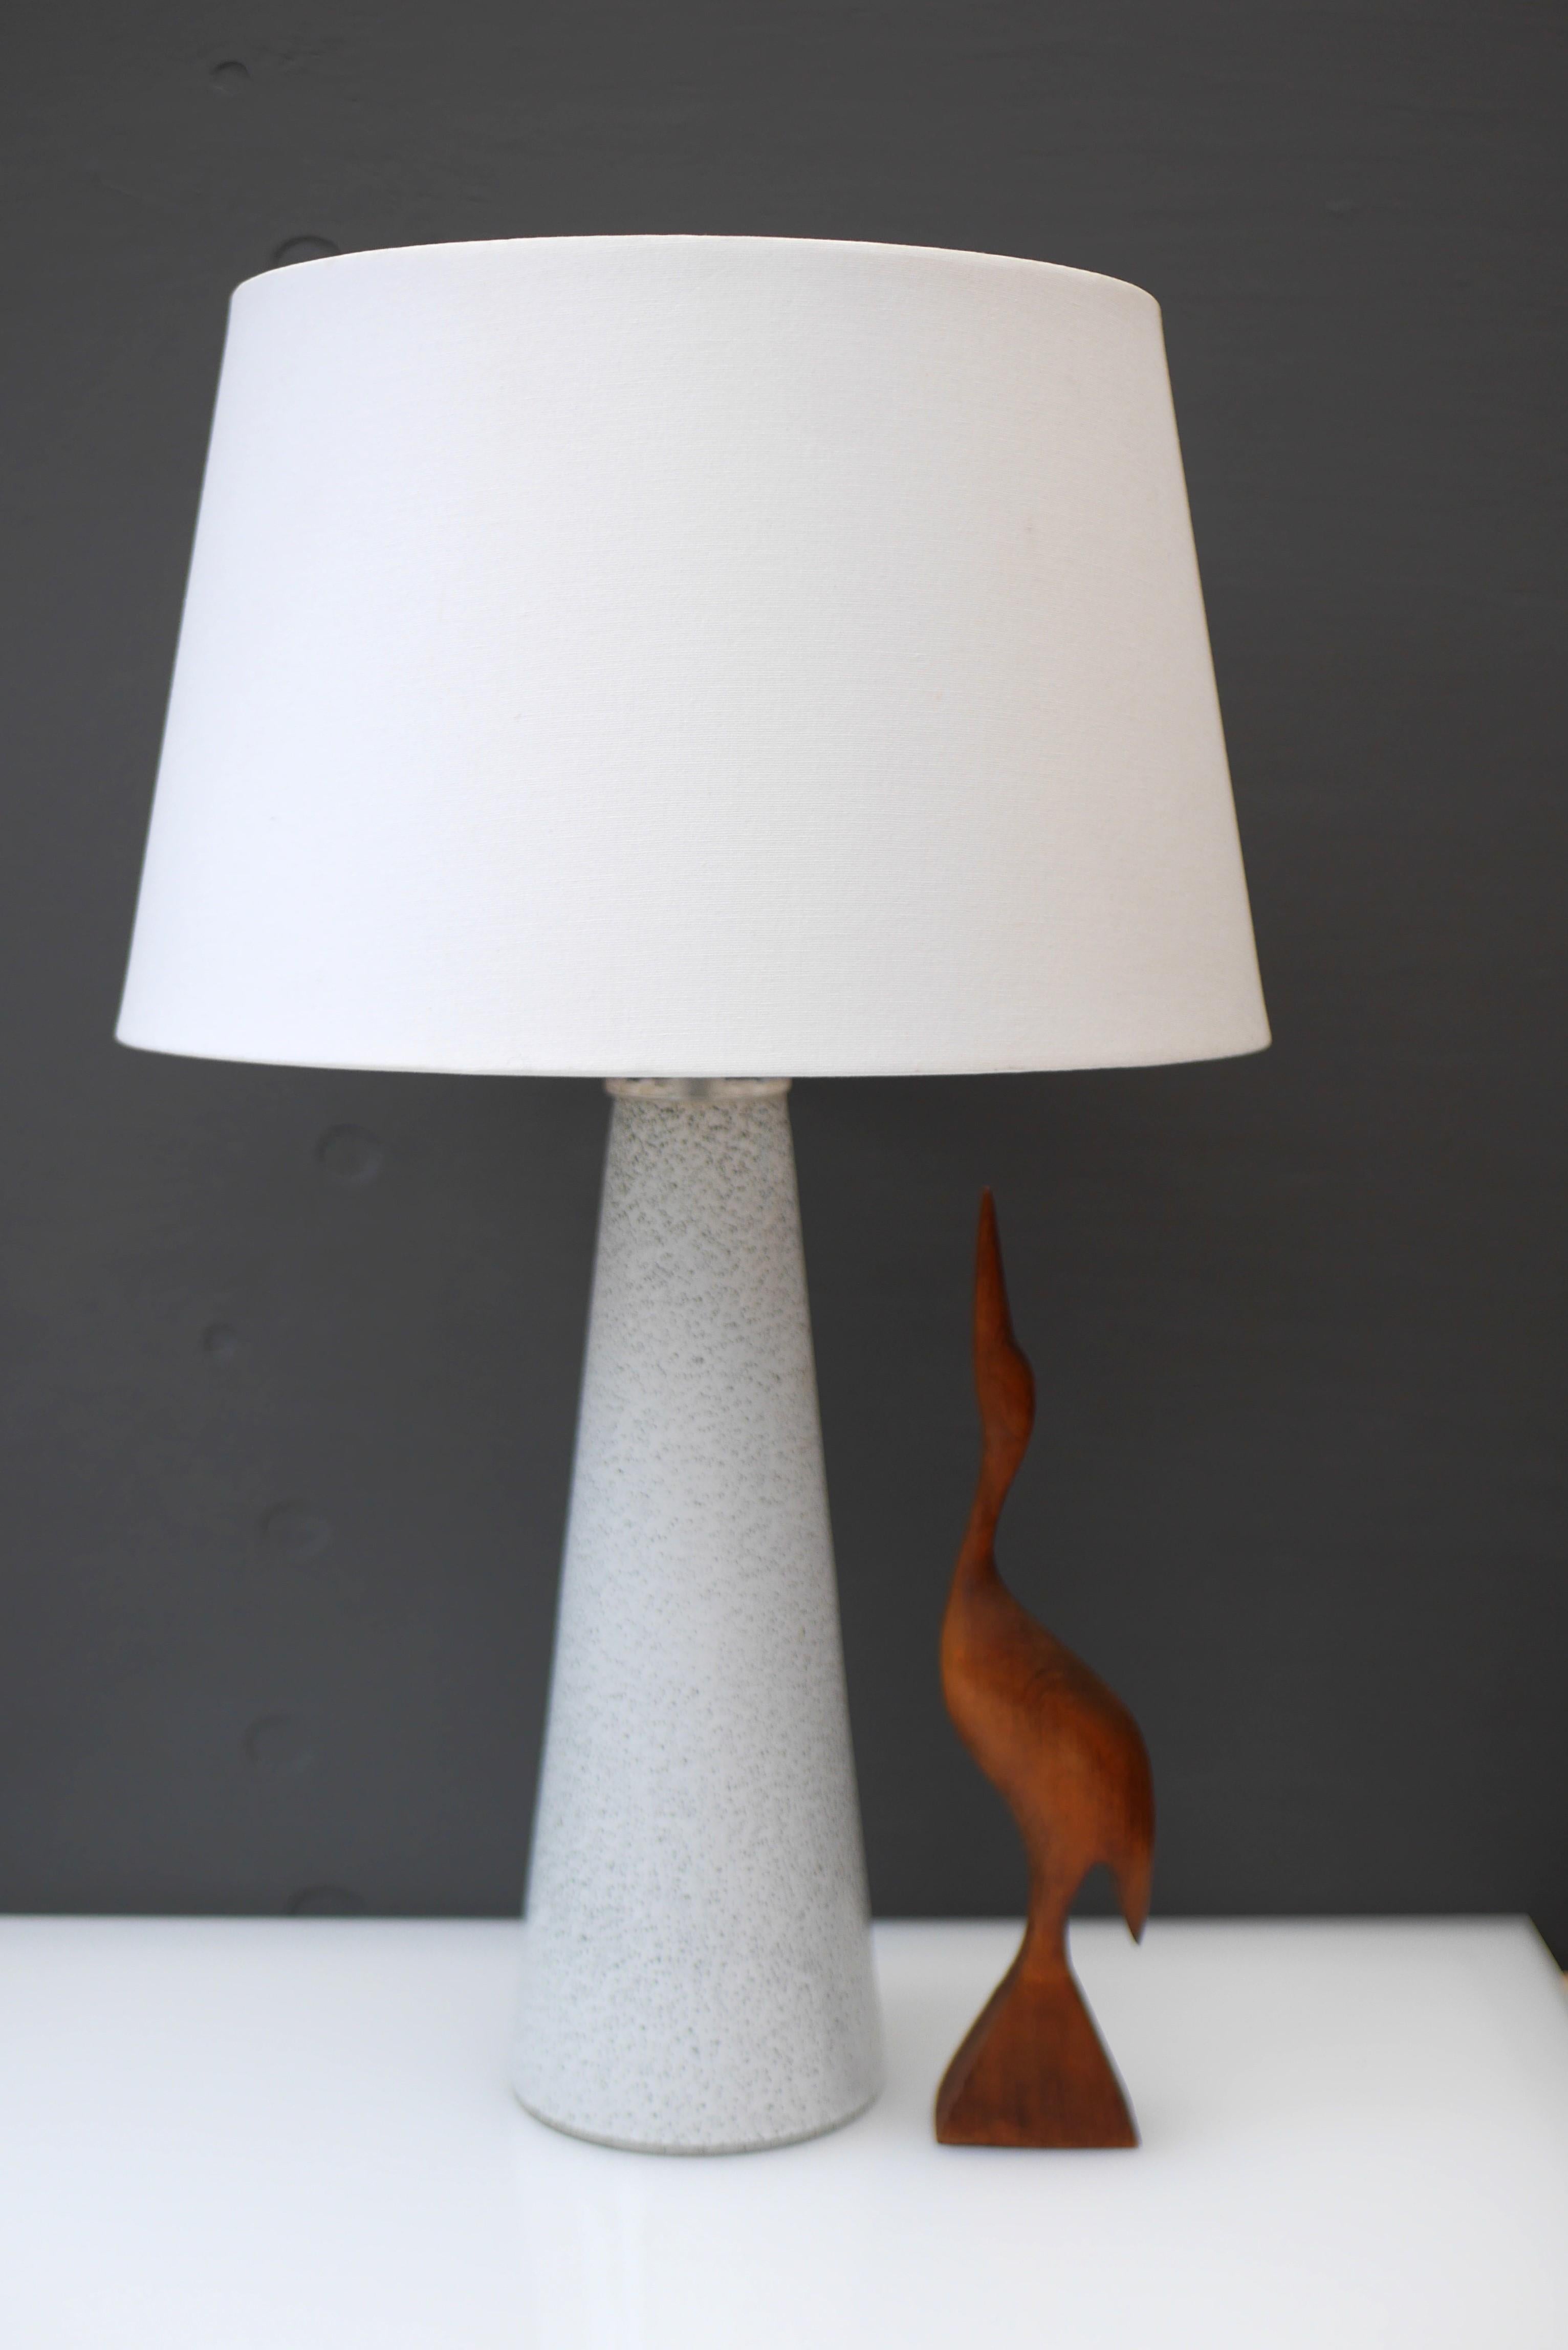 Late 20th Century An elegant glass art table lamp made by Bengt Orup for Hyllinge Glasbruk, Sweden For Sale